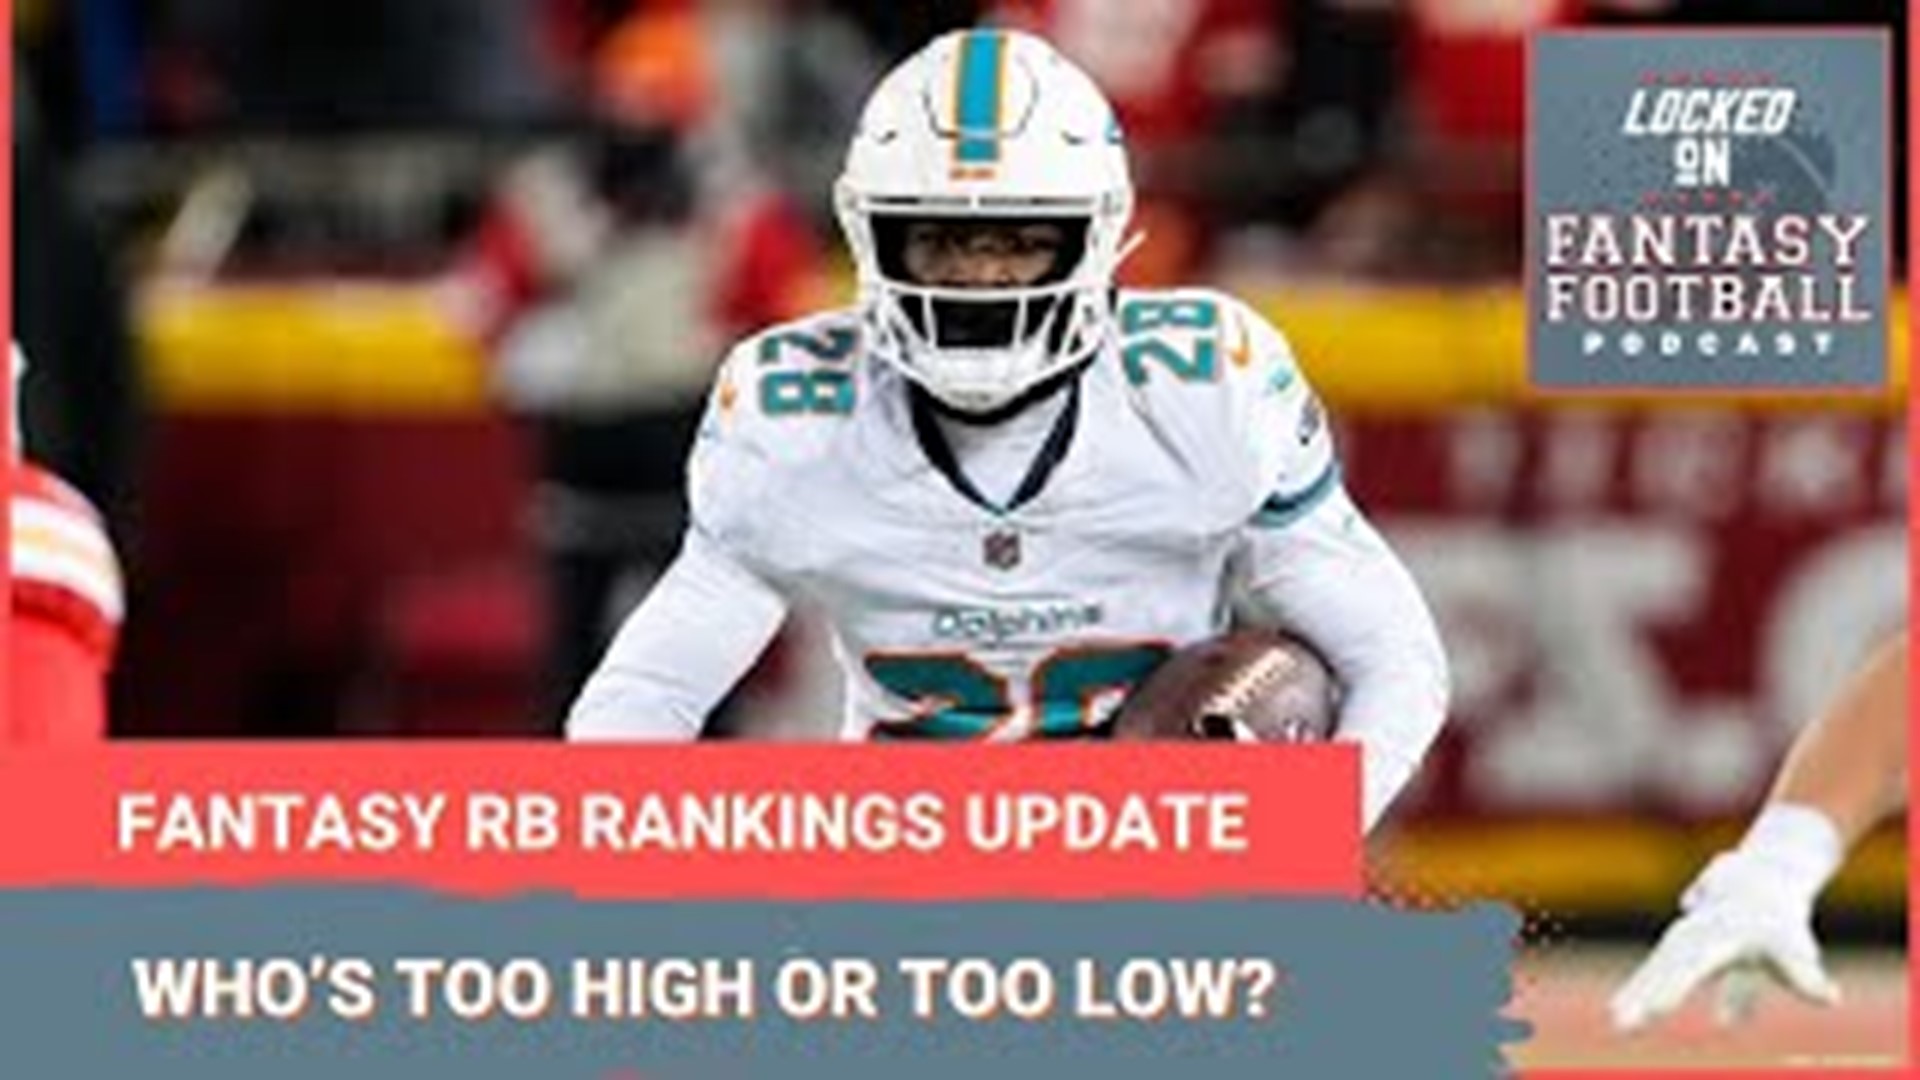 Sporting News.com's Vinnie Iyer and NFL.com's Michelle Magdziuk take a look at the early consensus fantasy football rankings at running back and share their thoughts